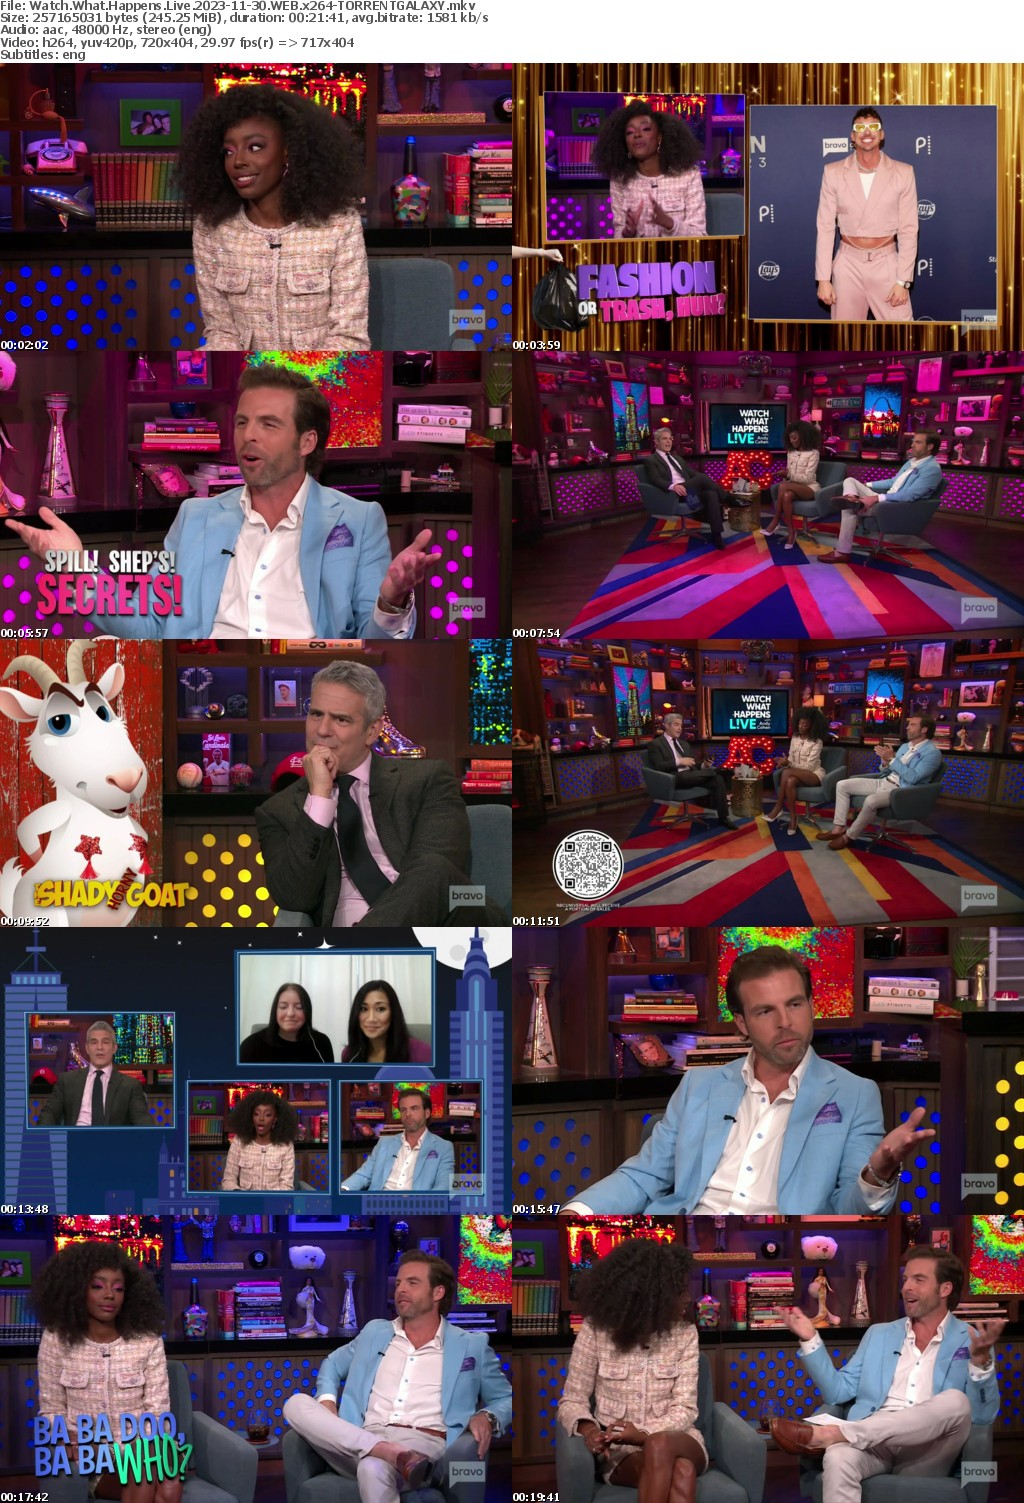 Watch What Happens Live 2023-11-30 WEB x264-GALAXY